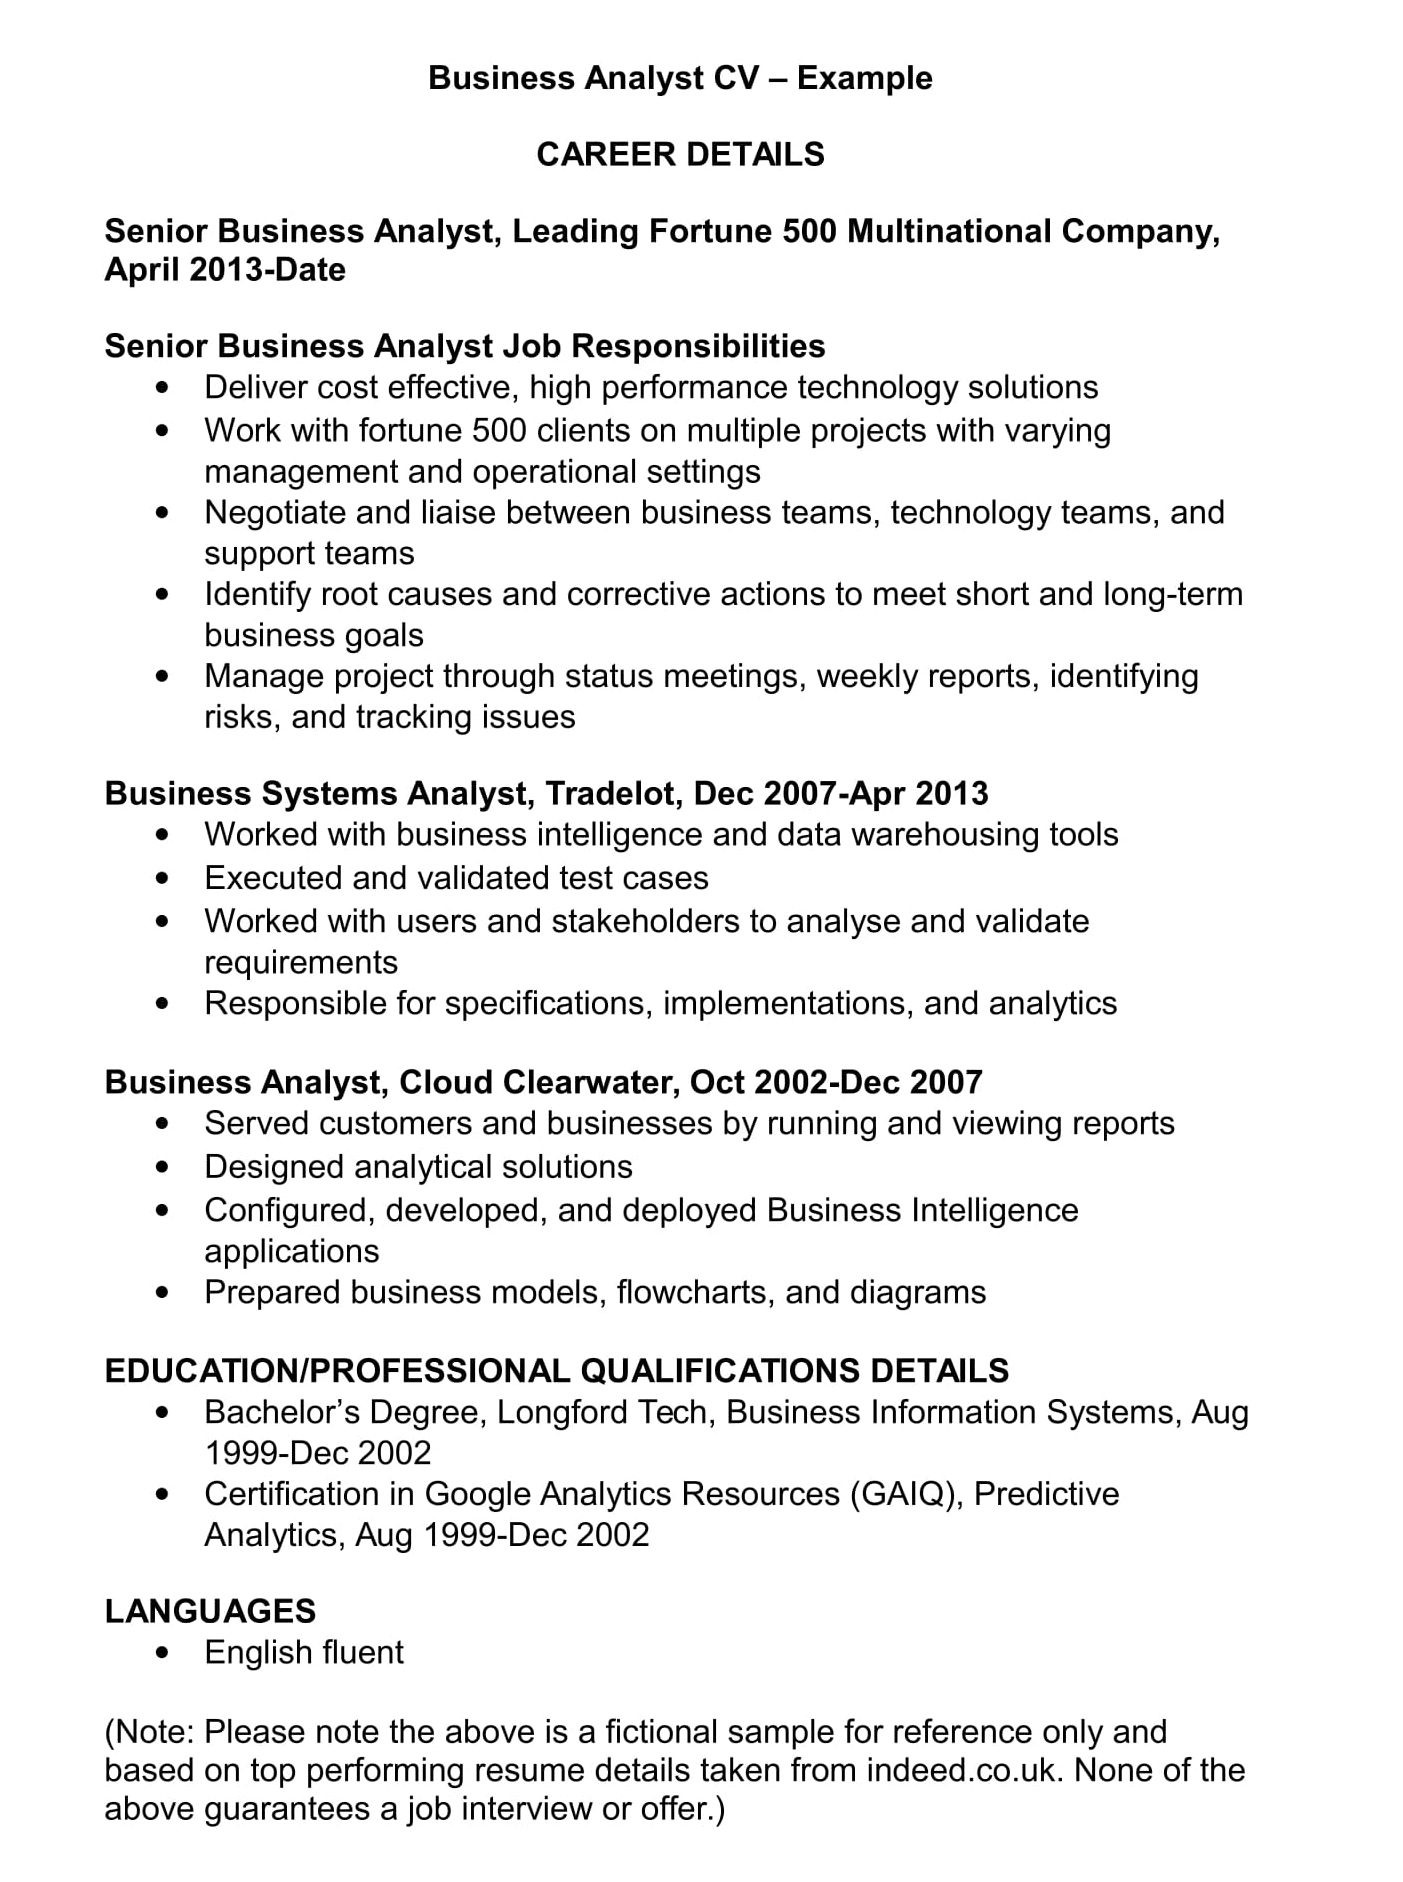 business analyst cv template and examples renaix